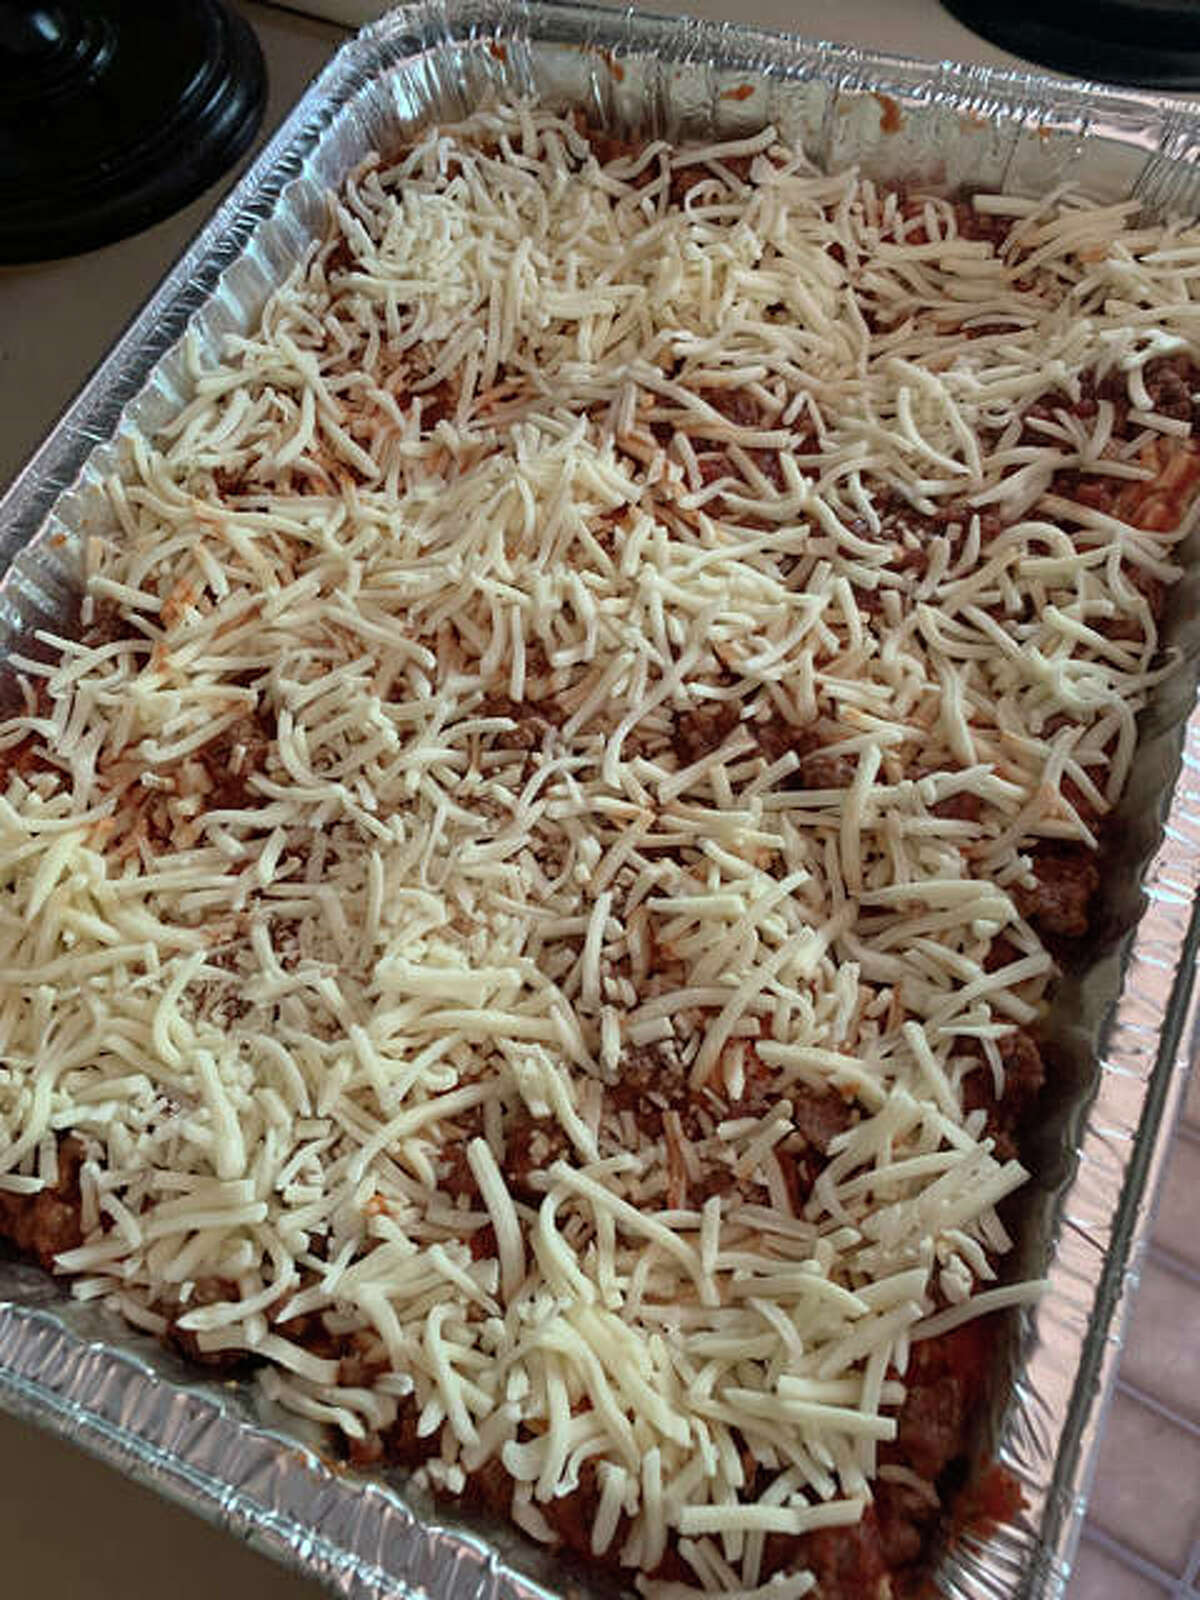 Italian stuffed shells, right before it was popped into the oven.